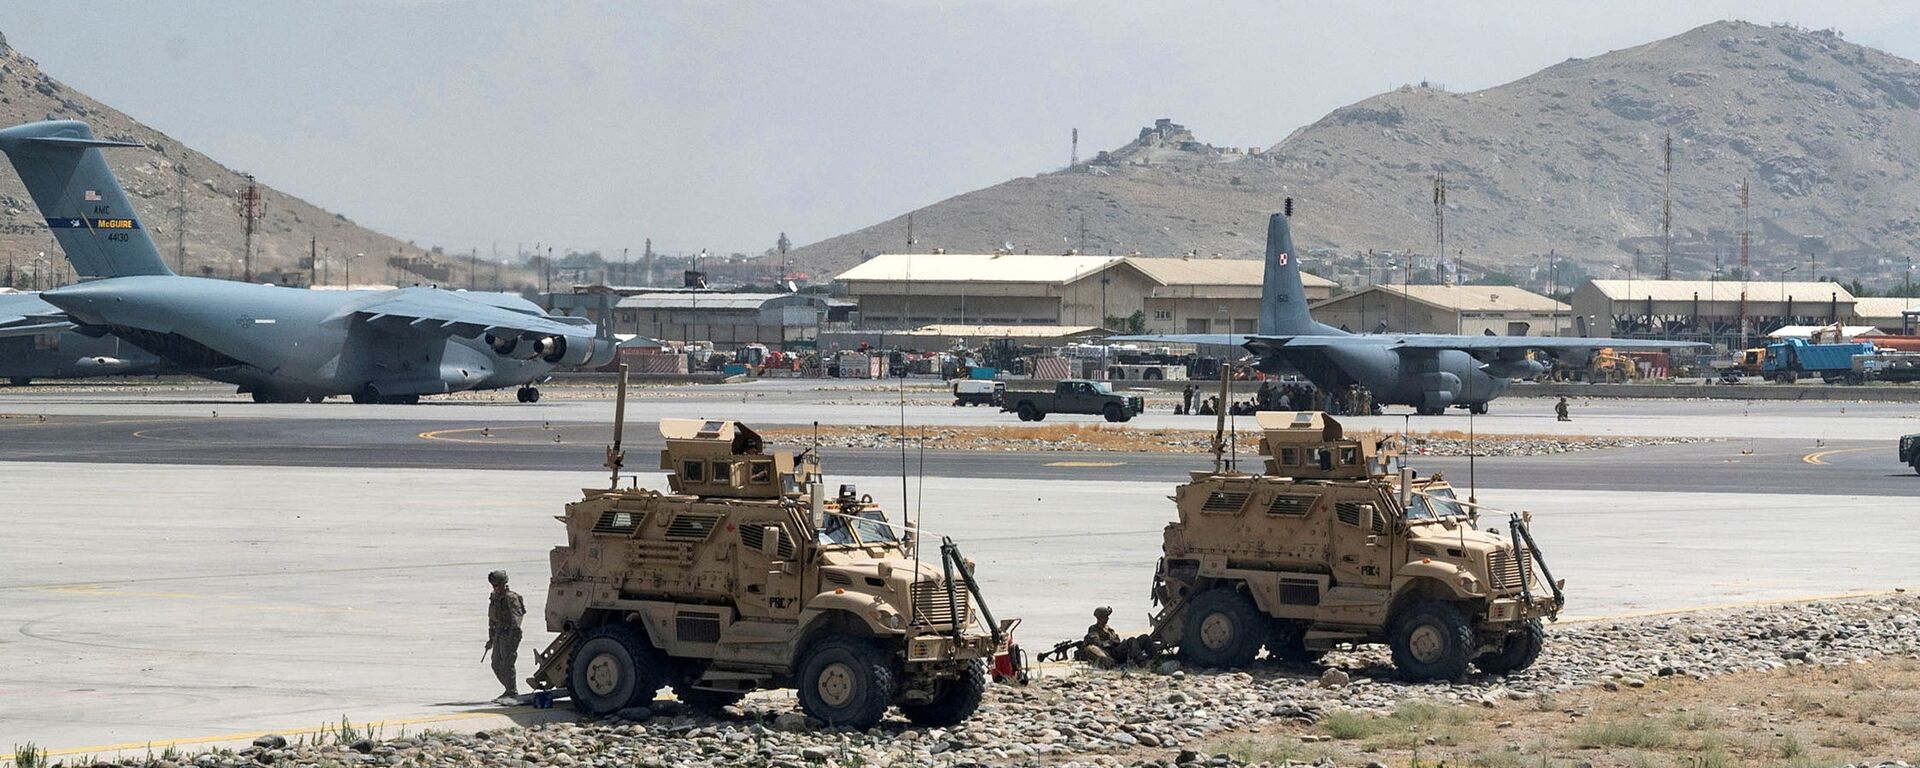 FILE PHOTO: FILE PHOTO: U.S. Army soldiers assigned to the 82nd Airborne Division patrol Hamid Karzai International Airport in Kabul, Afghanistan August 17, 2021. Picture taken August 17, 2021.  U.S. Air Force/Senior Airman Taylor Crul/Handout via REUTERS  THIS IMAGE HAS BEEN SUPPLIED BY A THIRD PARTY. THIS PICTURE WAS PROCESSED BY REUTERS TO ENHANCE QUALITY. AN UNPROCESSED VERSION HAS BEEN PROVIDED SEPARATELY./File Photo/File Photo - Sputnik International, 1920, 28.08.2021